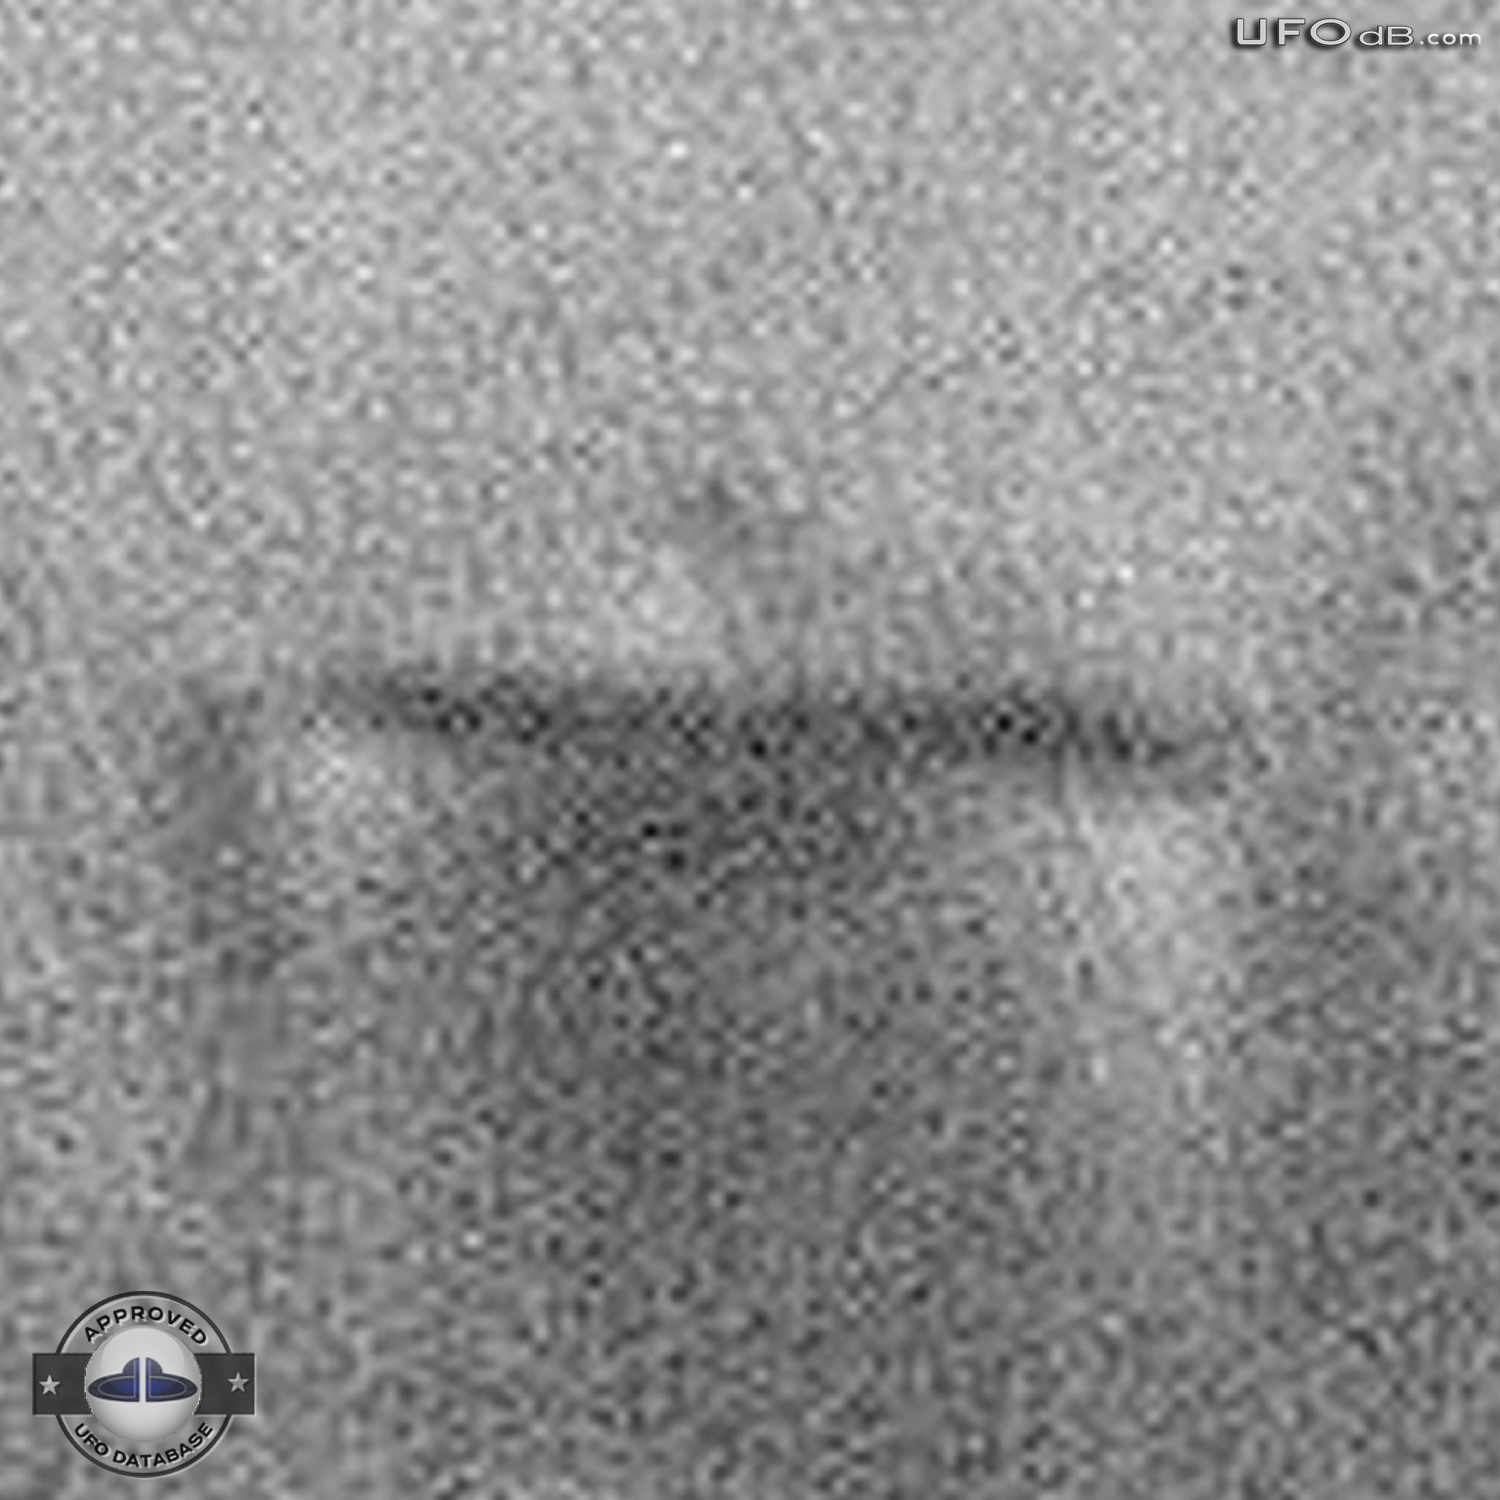 Dust Blowing UFO over the Fields of Verdun in France | March 27 1985 UFO Picture #304-4